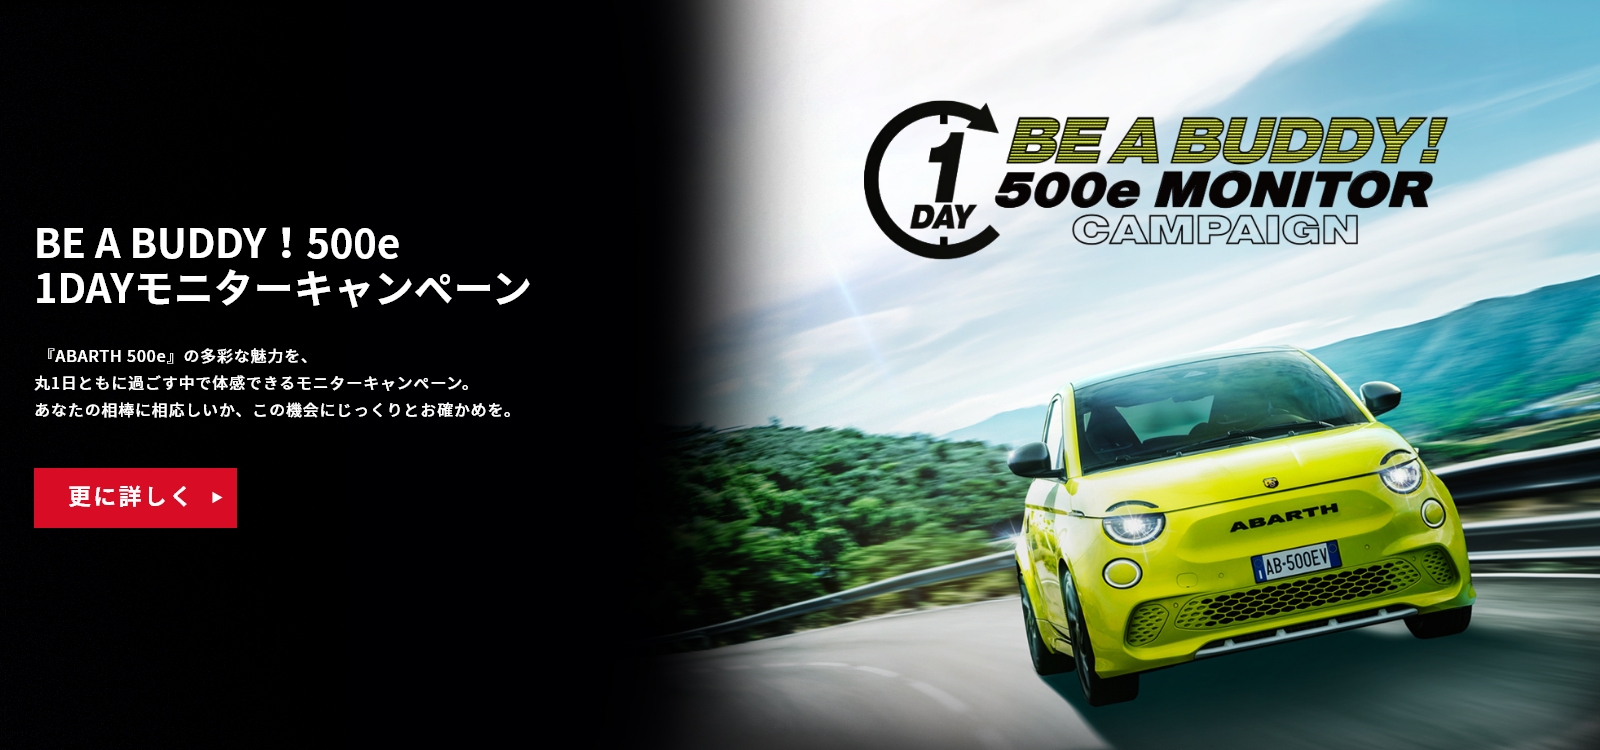 BE A BUDDY！500e 1DAYモニターキャンペーン